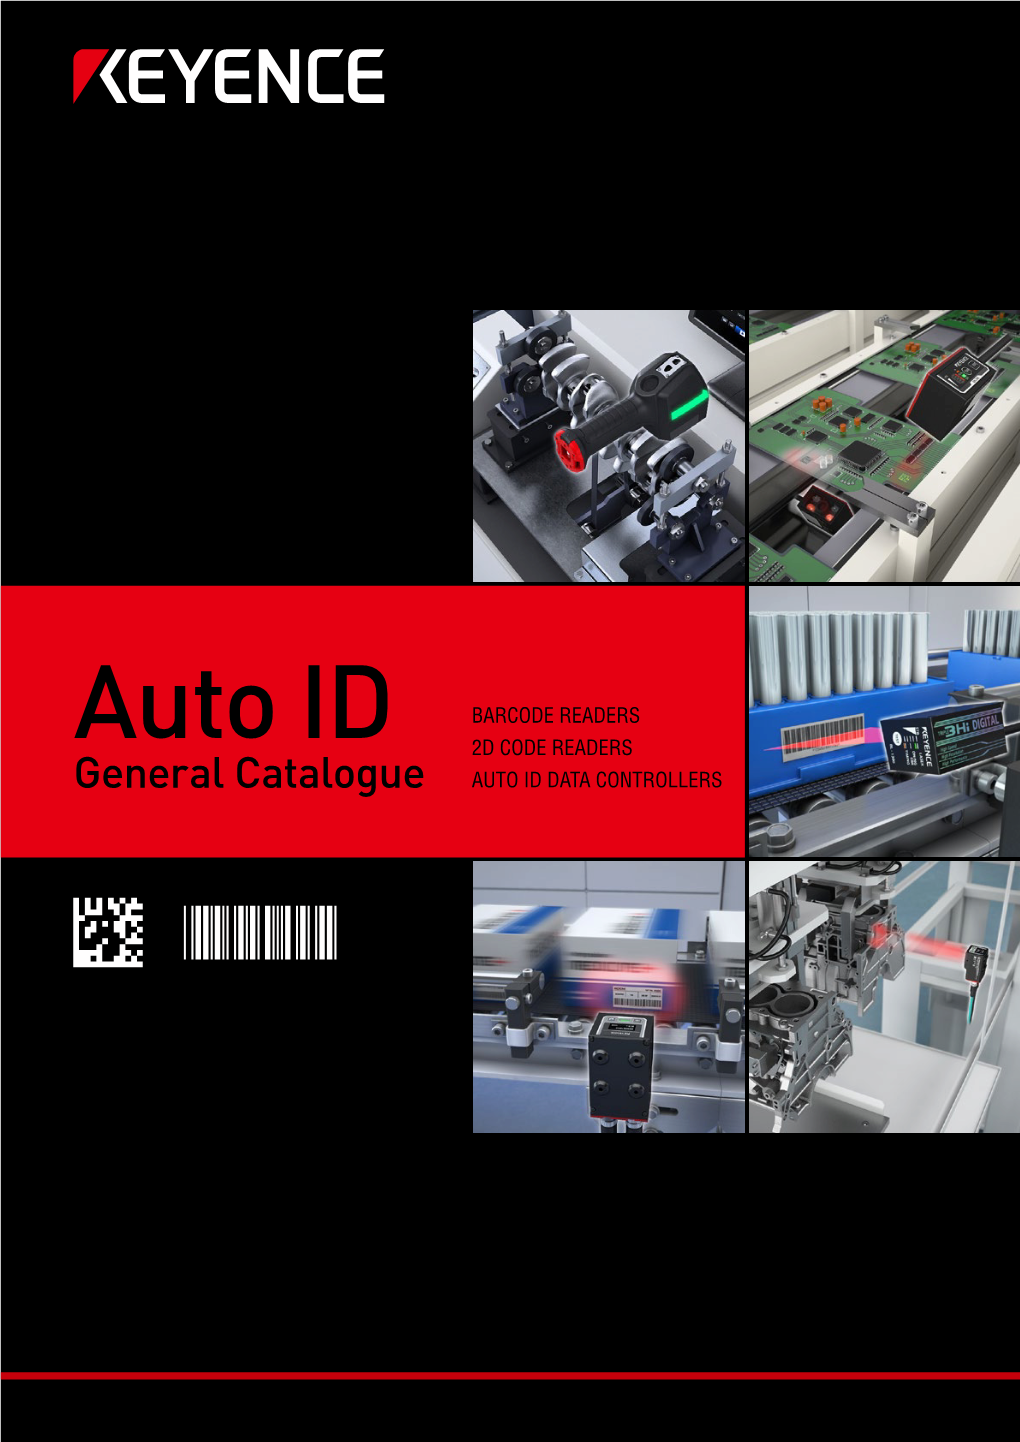 Auto ID 2D CODE READERS General Catalogue AUTO ID DATA CONTROLLERS SETTING a NEW STANDARD for Code Reading Combining Performance and Reliability